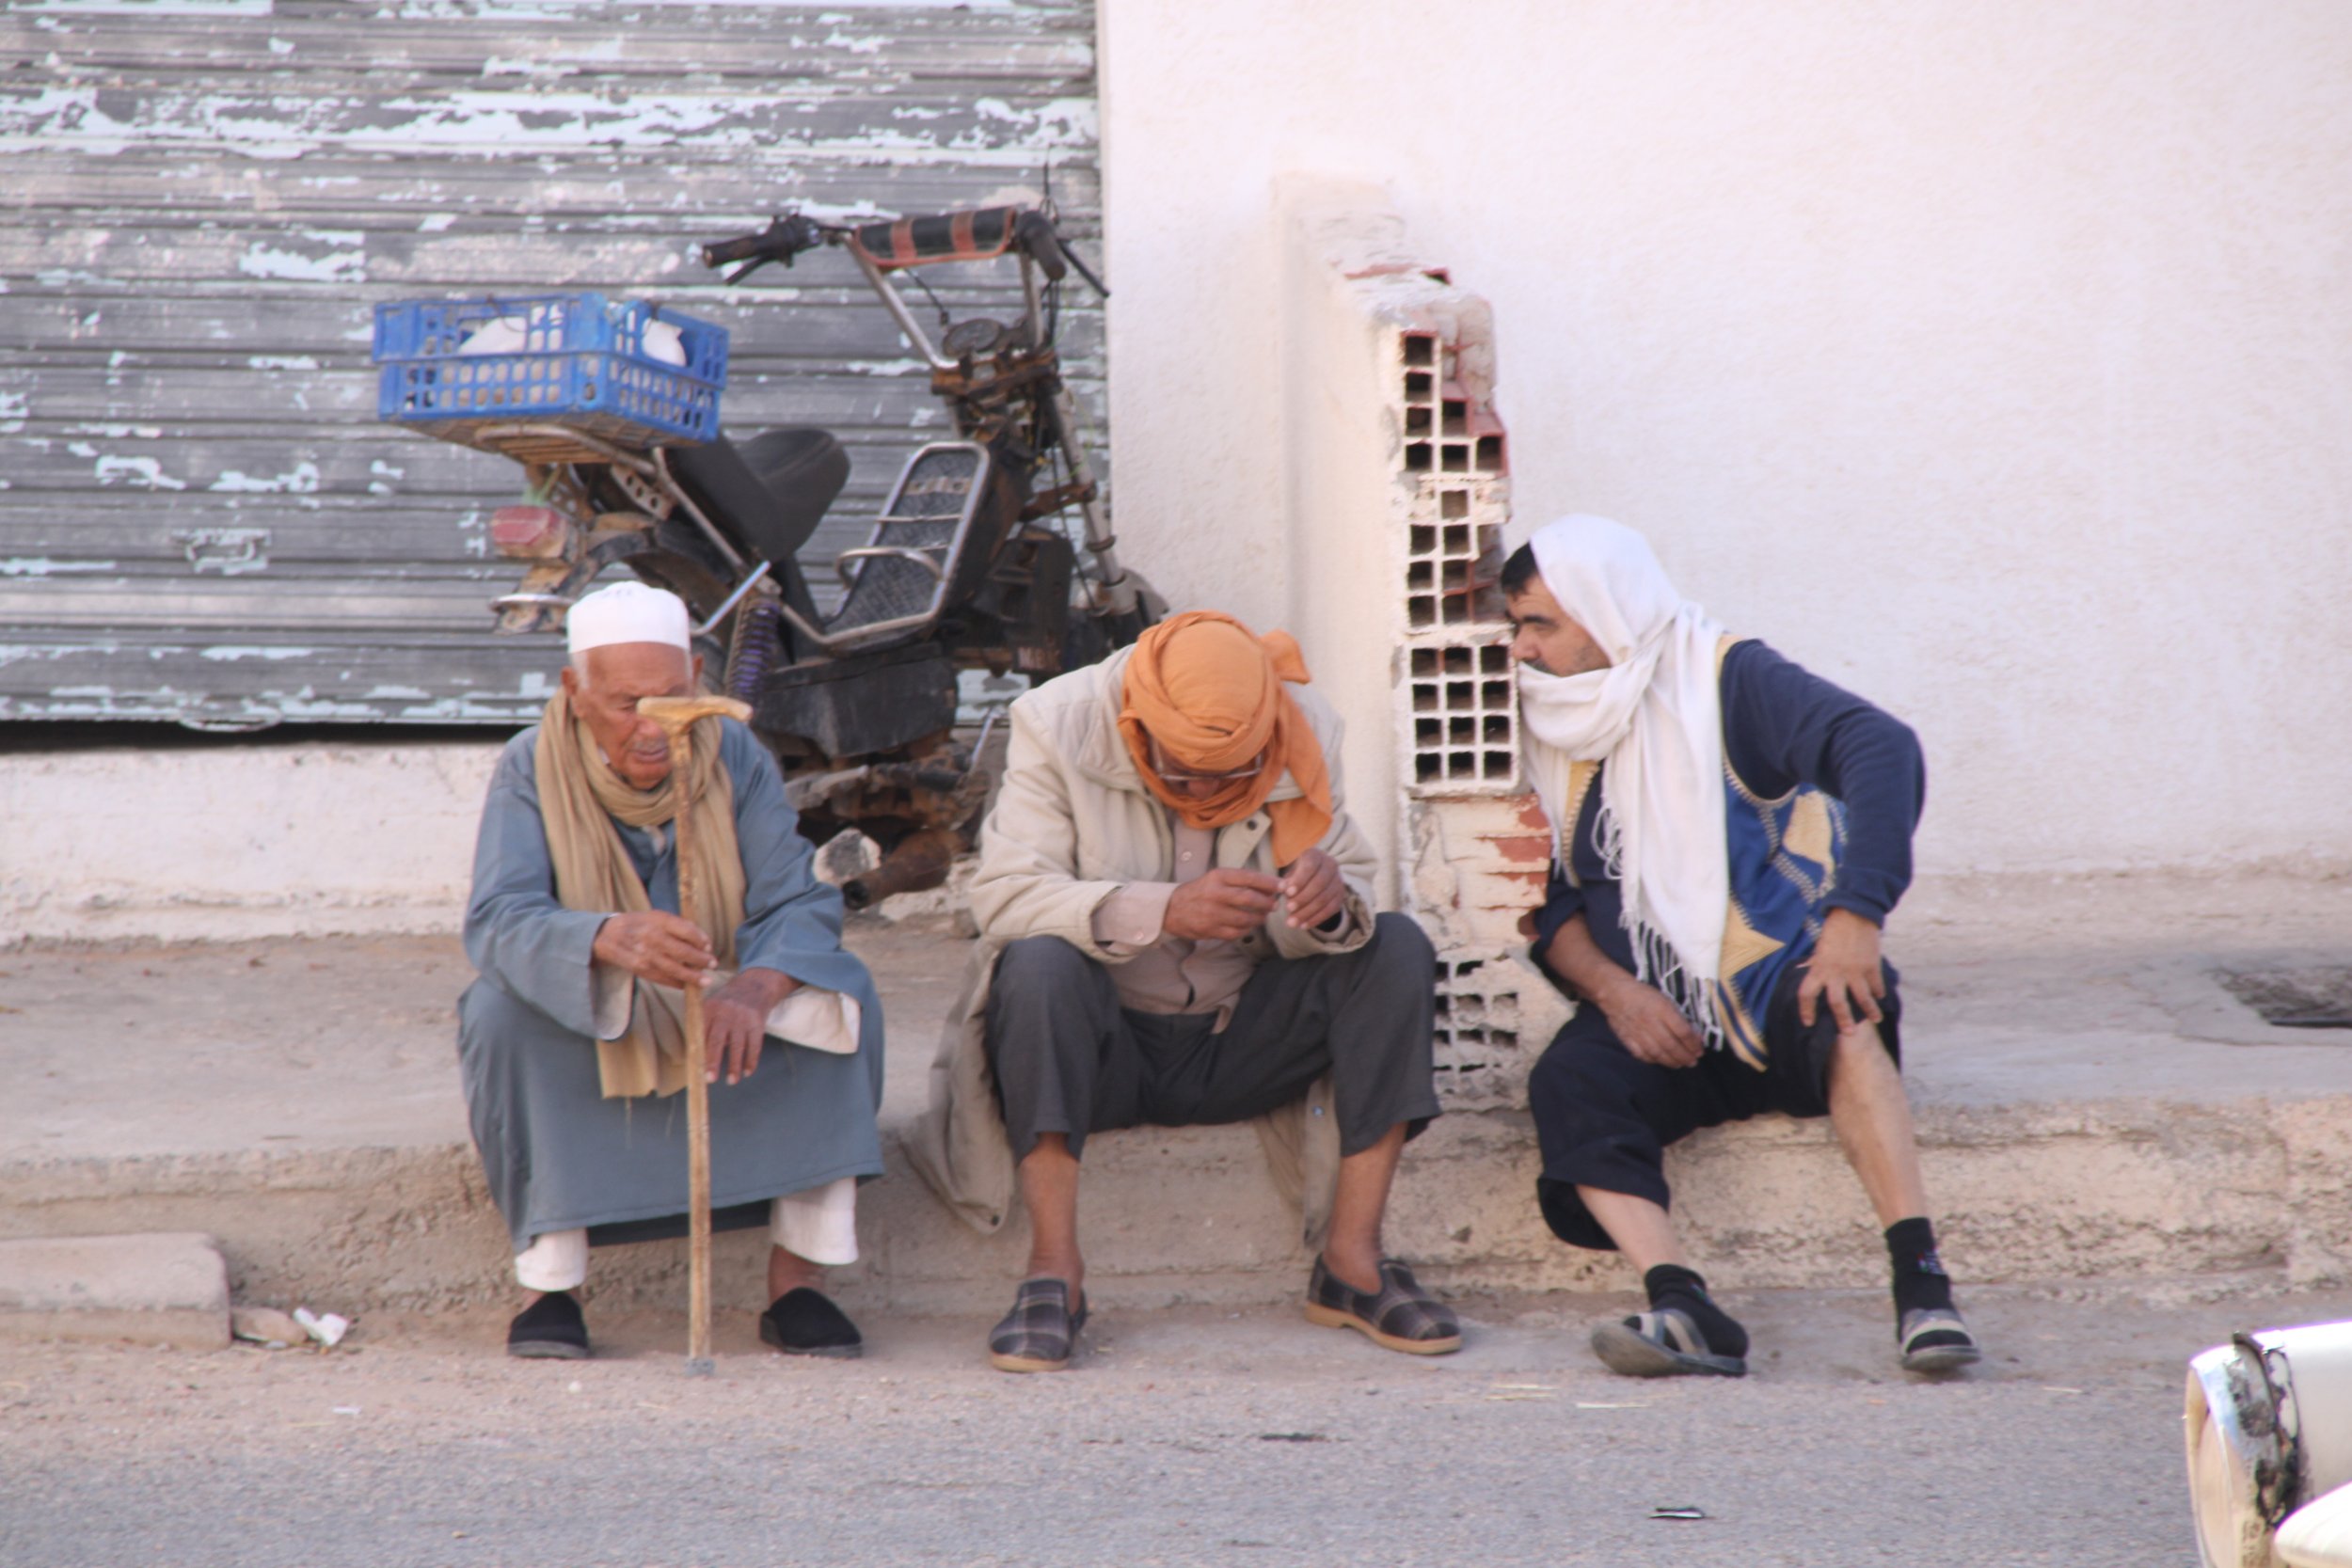  NOVEMBER 20th, 2022. PICTURED: Berber men rest at midday in one of the new towns. PC: Andrew Corbley © 